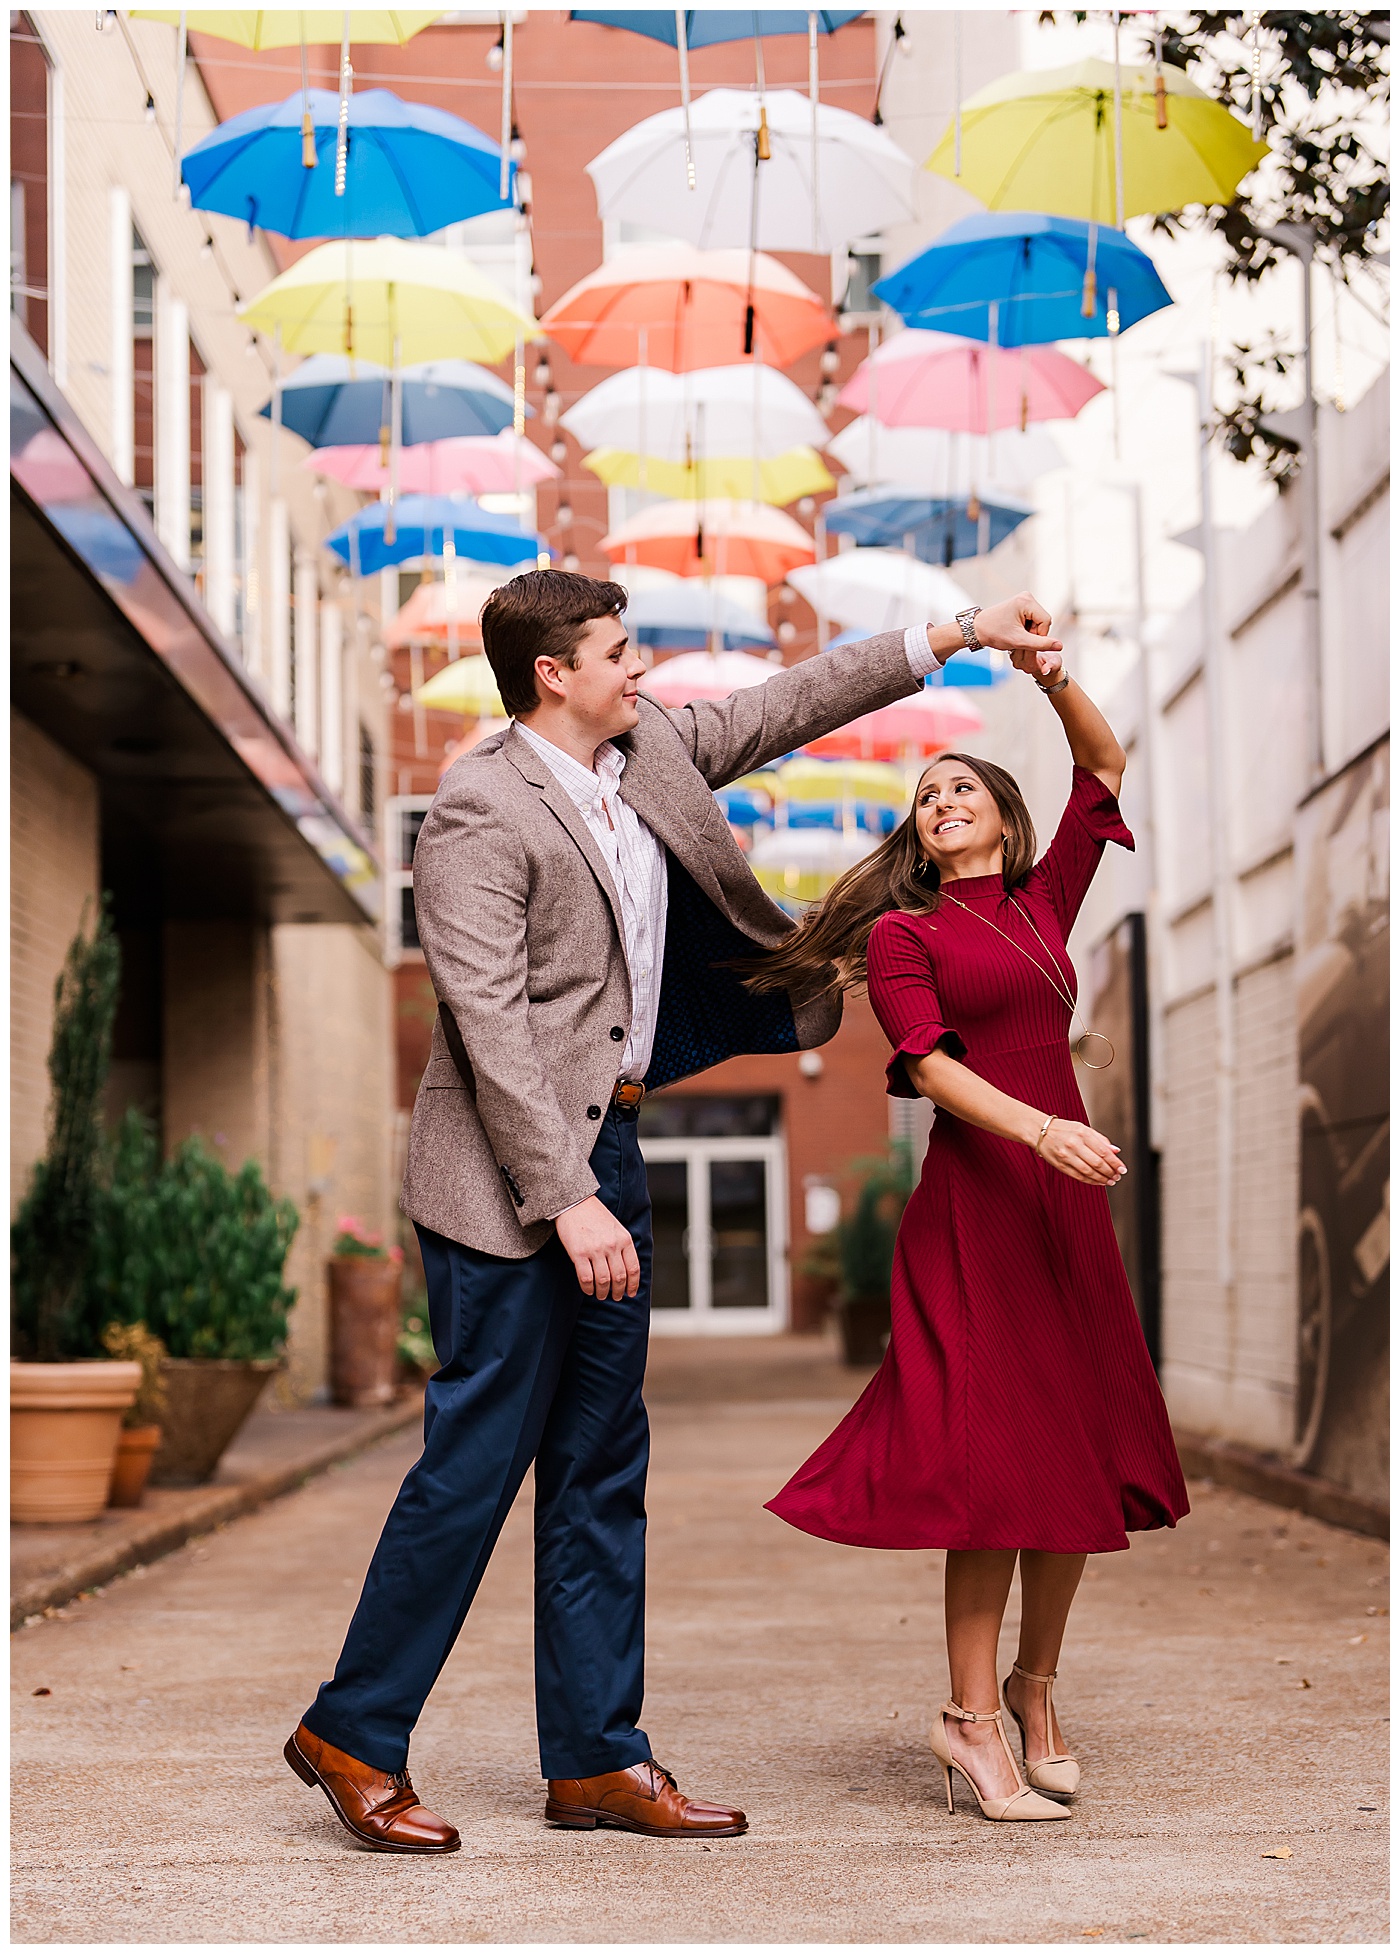 Downtown Chattanooga Engagement Dancing Couple Umbrella Alley